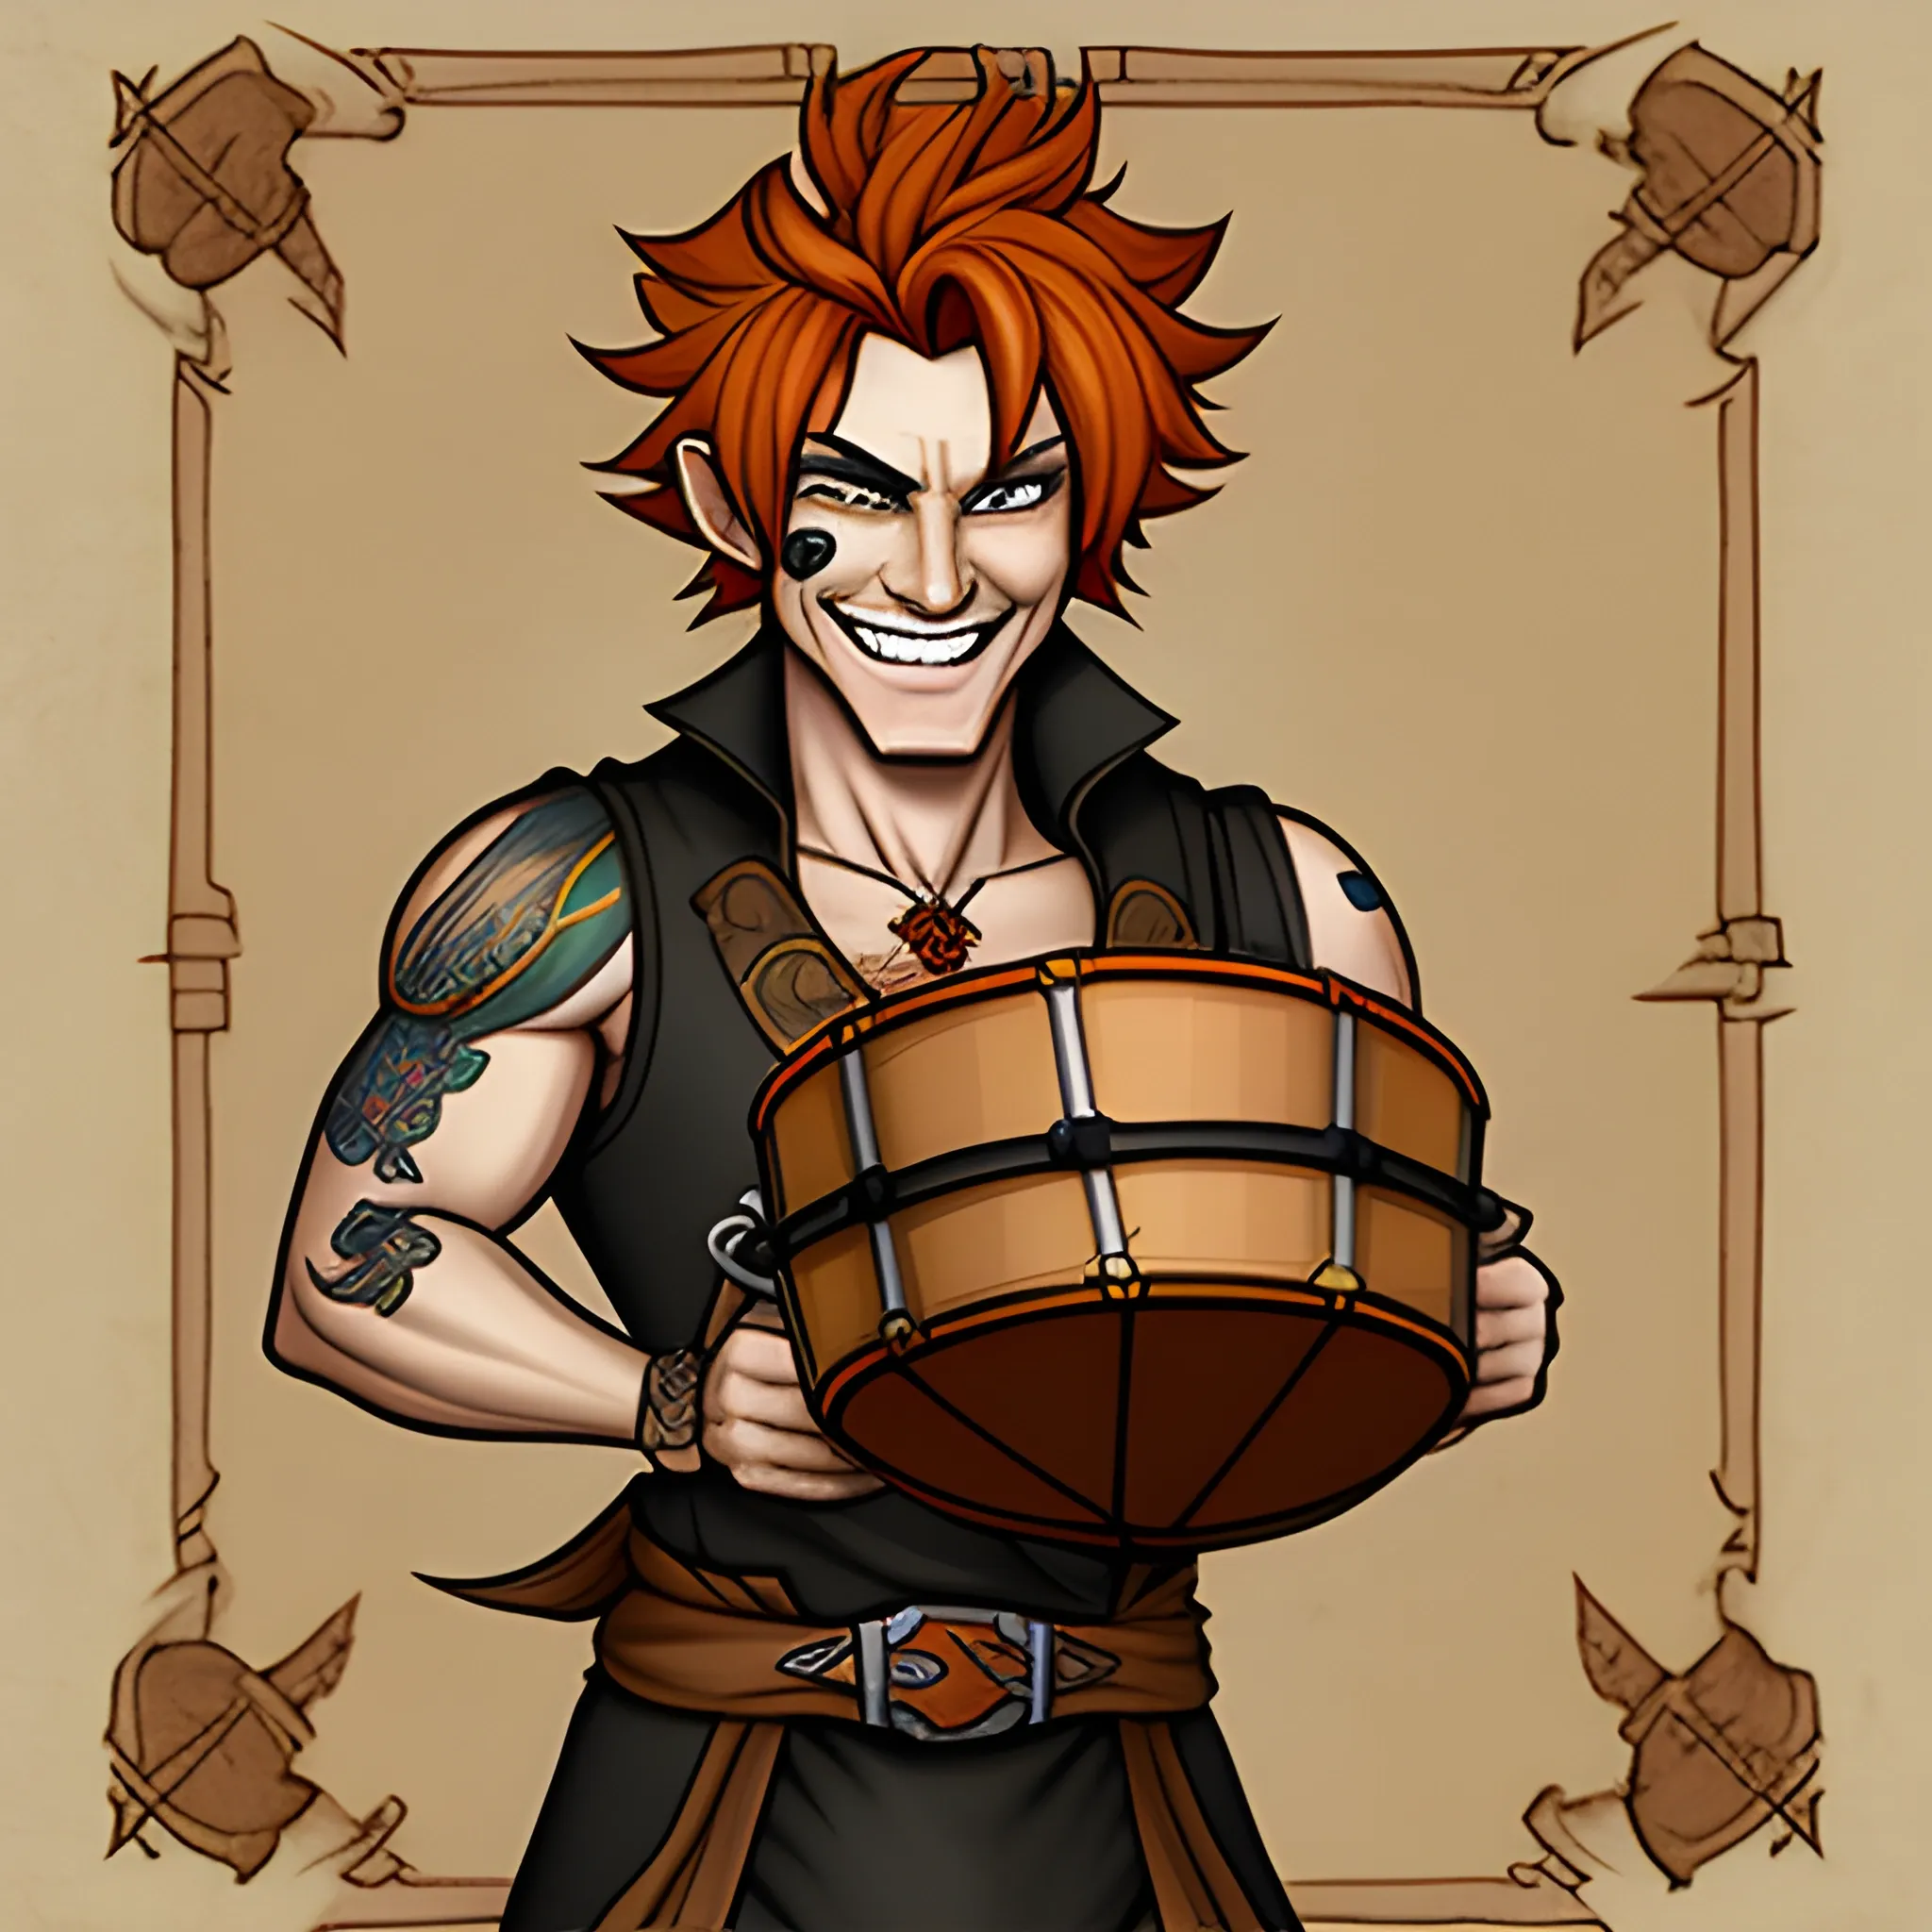 DnD teenage young build male short haired halfling dark orange ginger with a perilla chest treasure map tatoo smiling with a mugshot expression and playing a small drum 